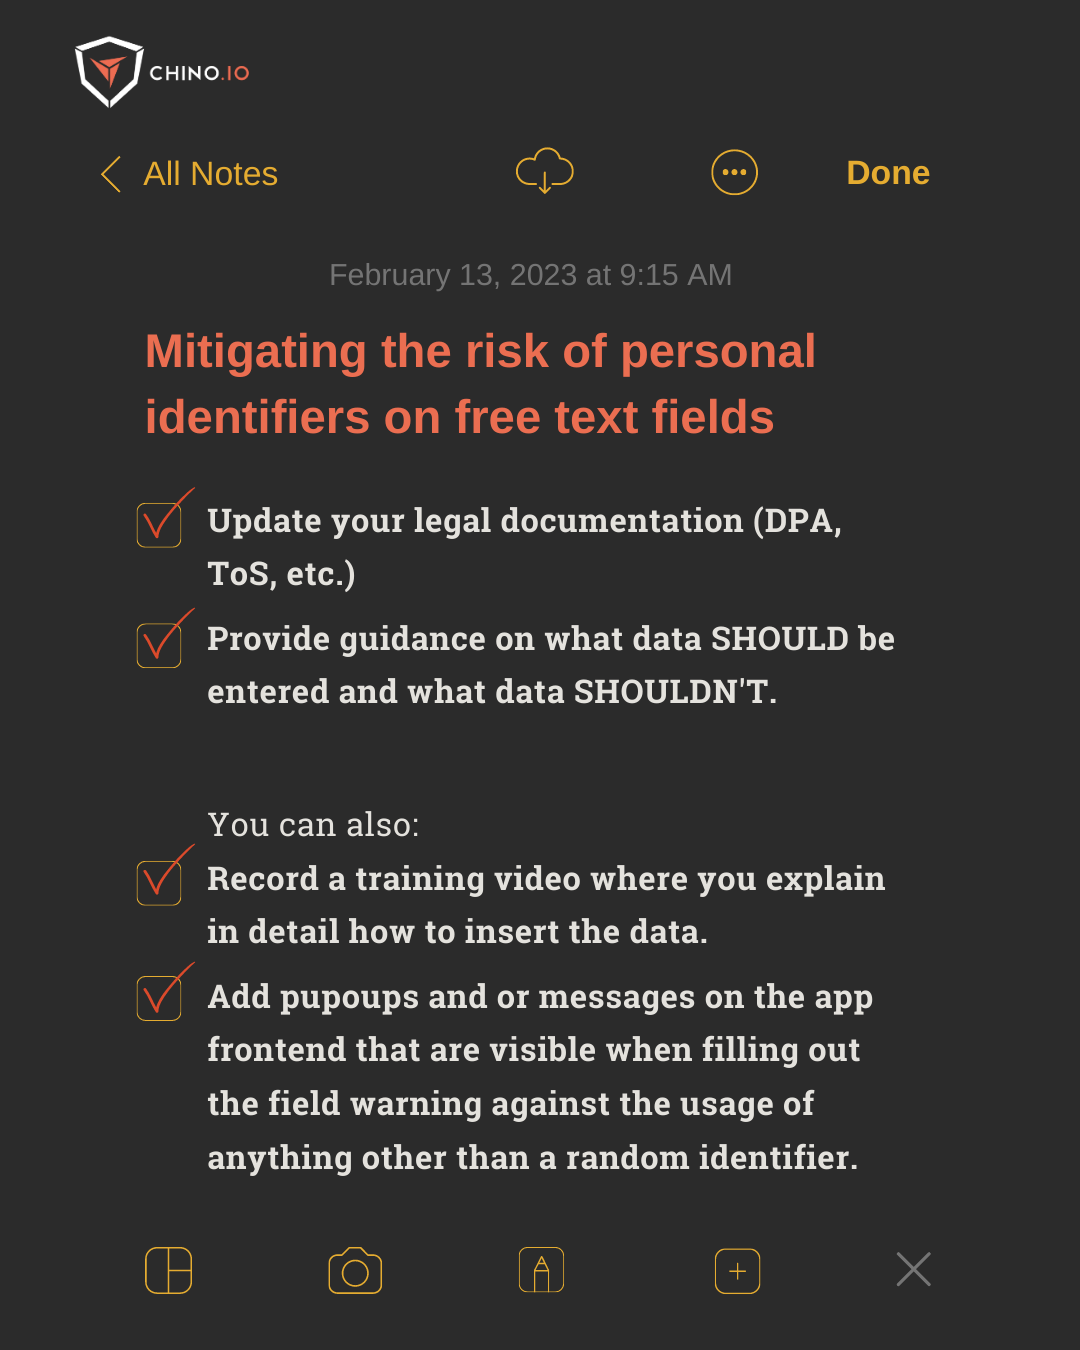 smartphone note with a checklist about how to mitigate the risk of personal identifiers on free text fields